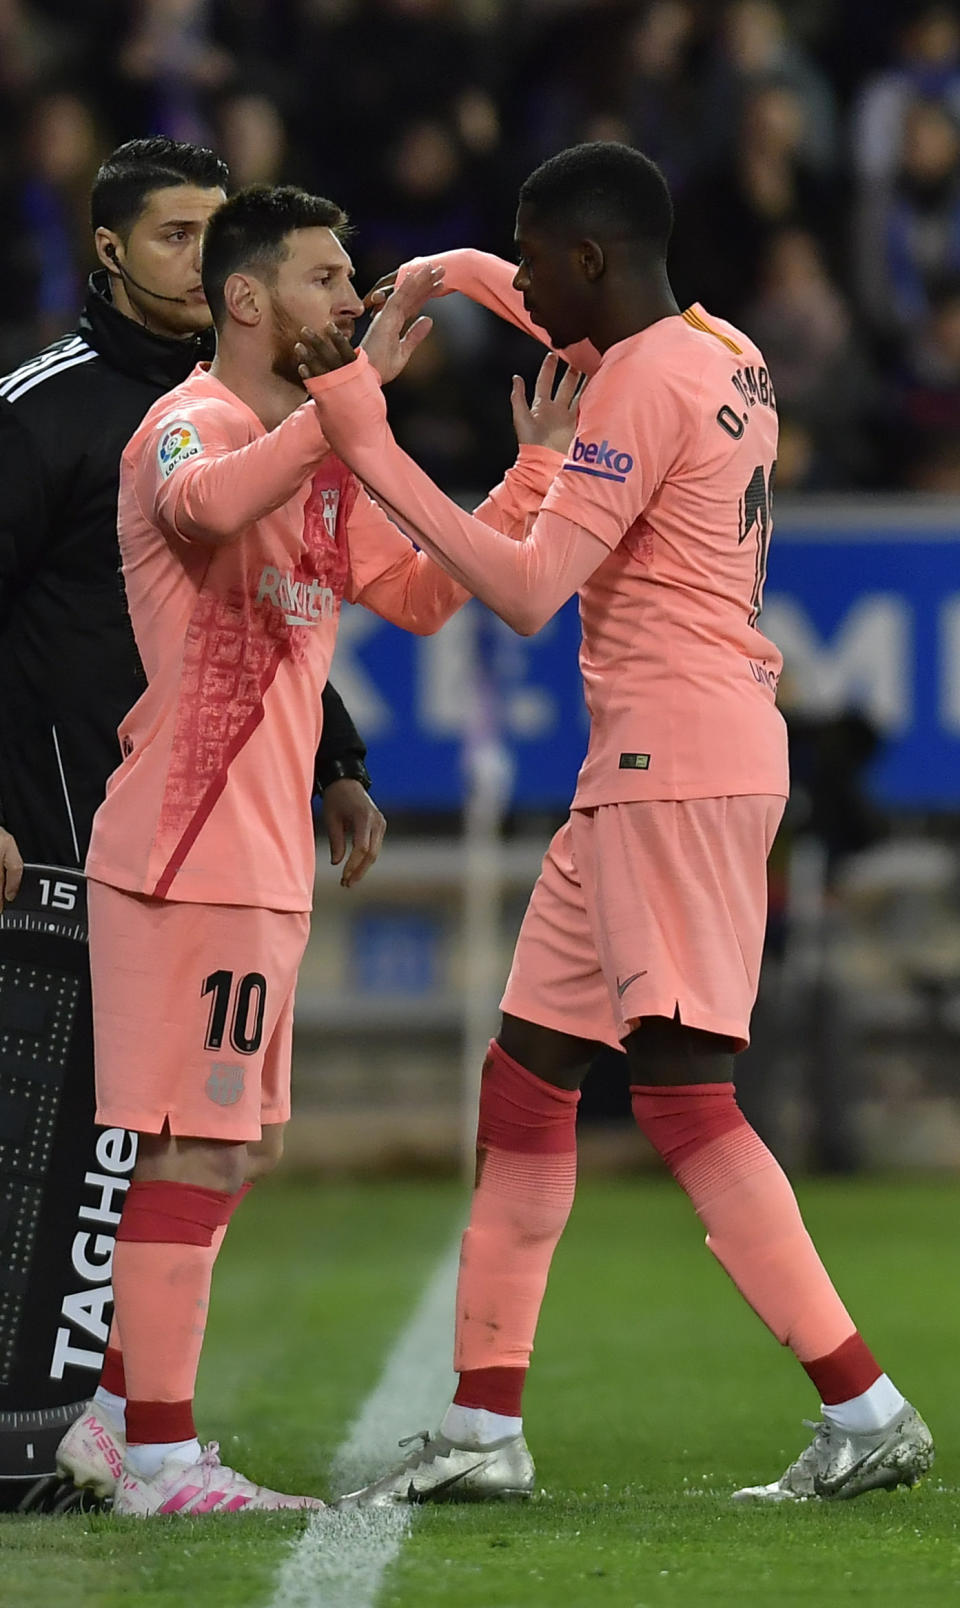 Barcelona forward Ousmane Dembele is replaced by forward Lionel Messi during a Spanish La Liga soccer match between Deportivo Alaves and FC Barcelona at the Medizorrosa stadium in Vitoria, Spain, Tuesday, April 23, 2019. (AP Photo/Alvaro Barrientos)